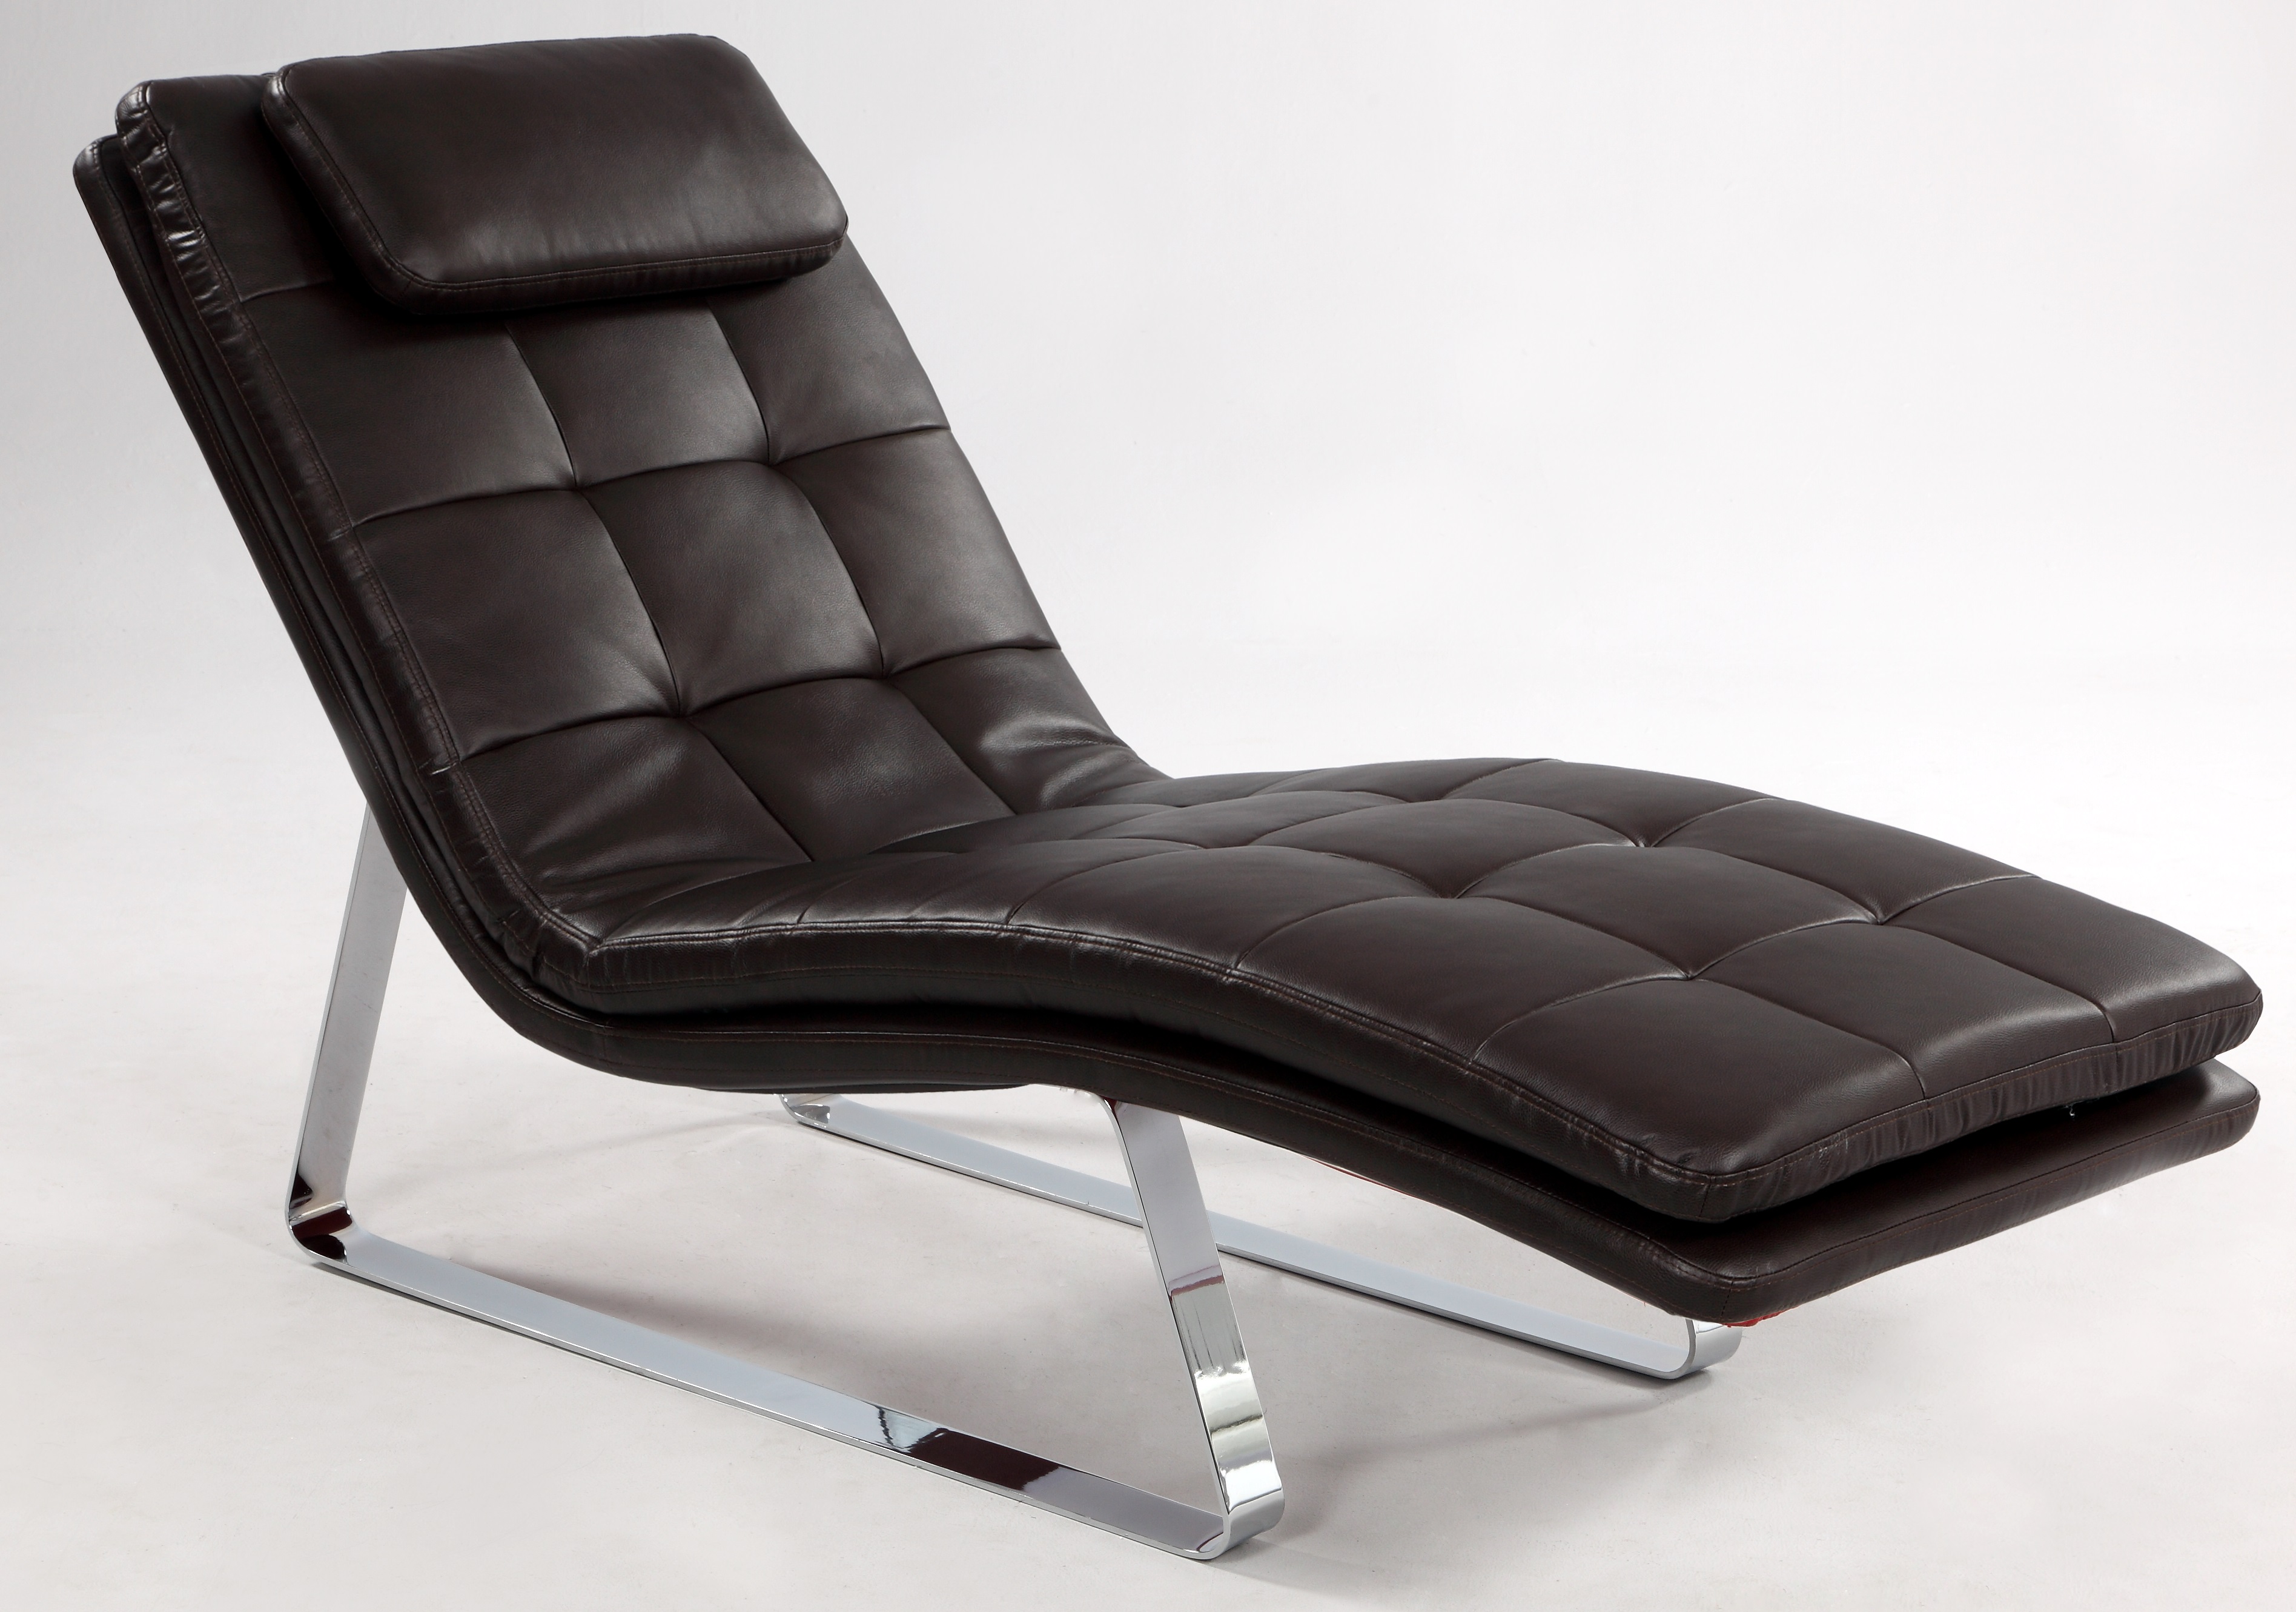 Full Bonded Leather Tufted Chaise Lounge With Chrome Legs - Click Image to Close